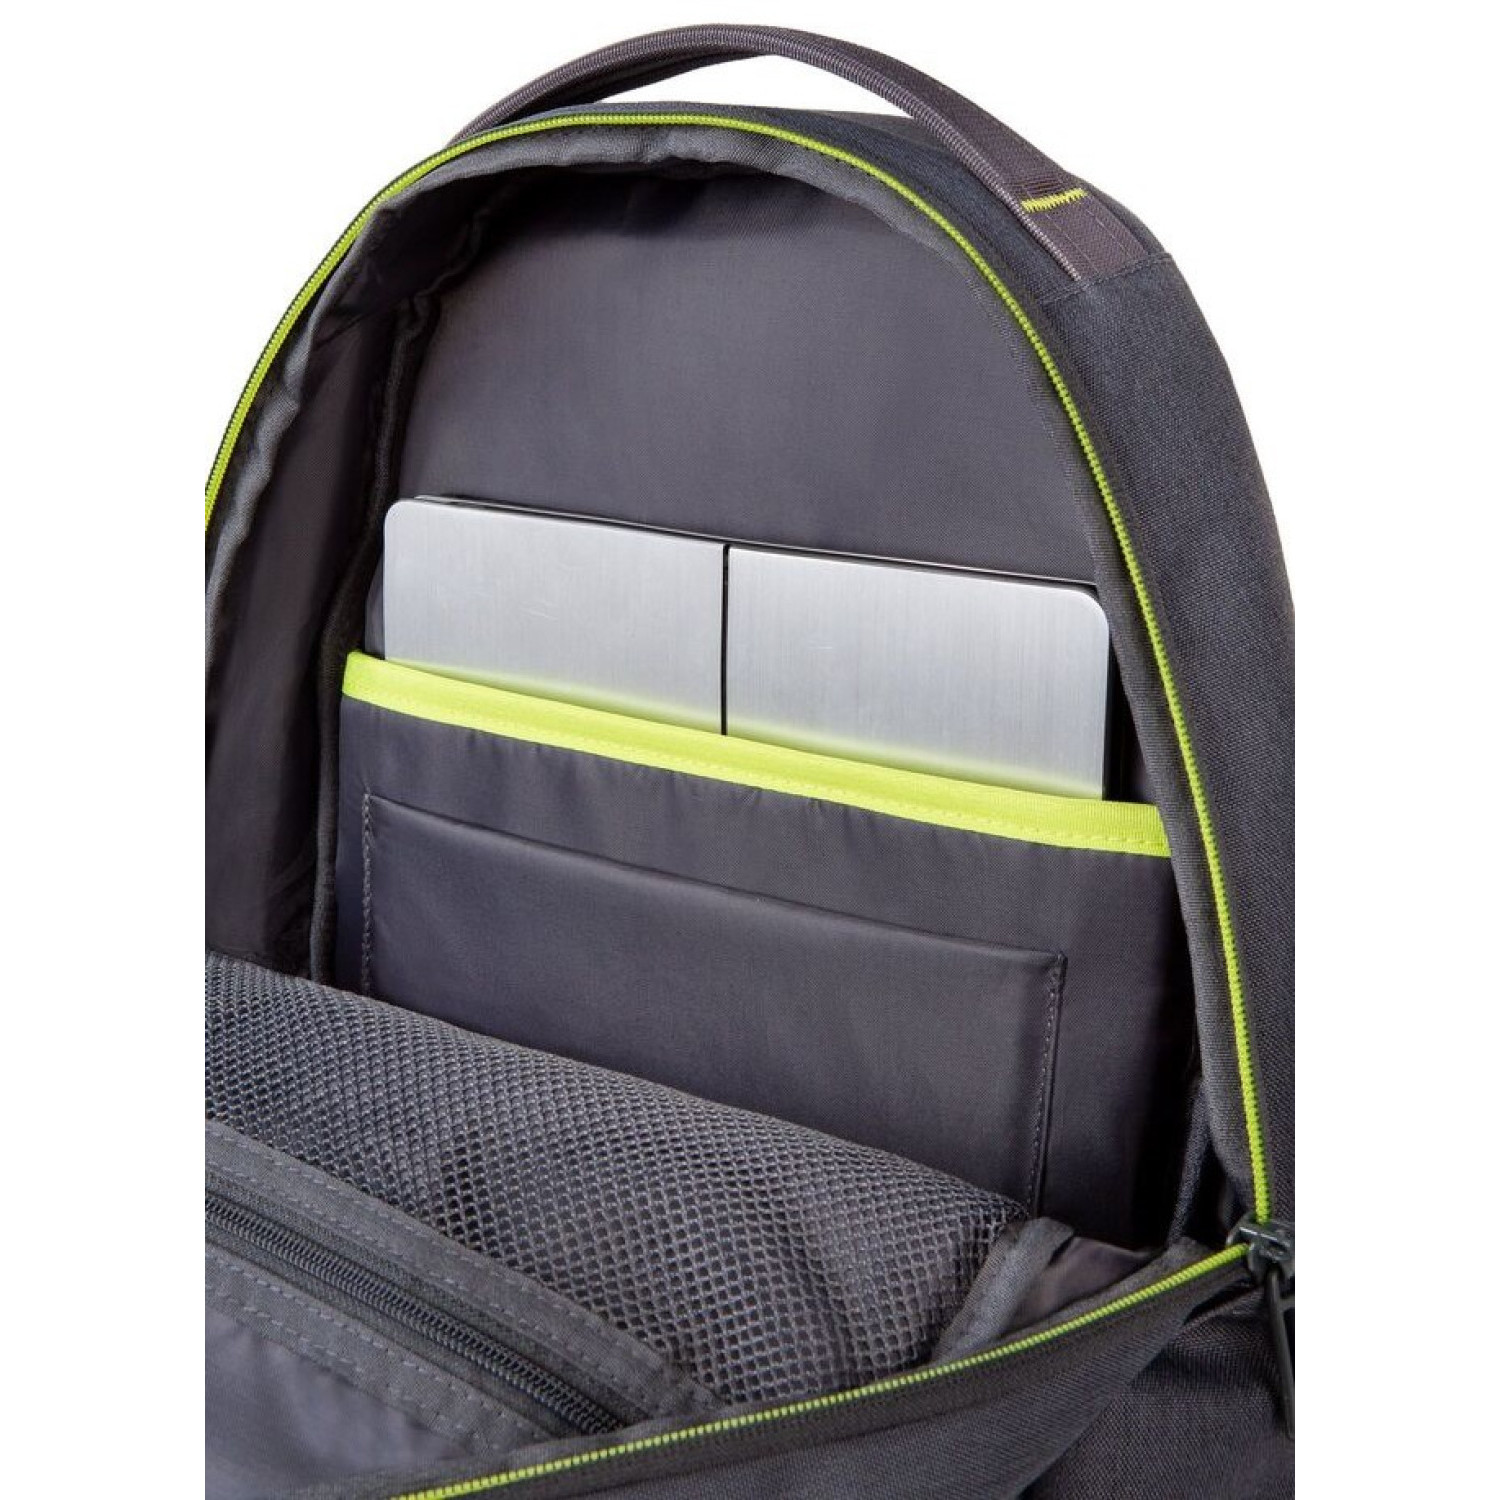 Раница Coolpack Ray Grey, E53009